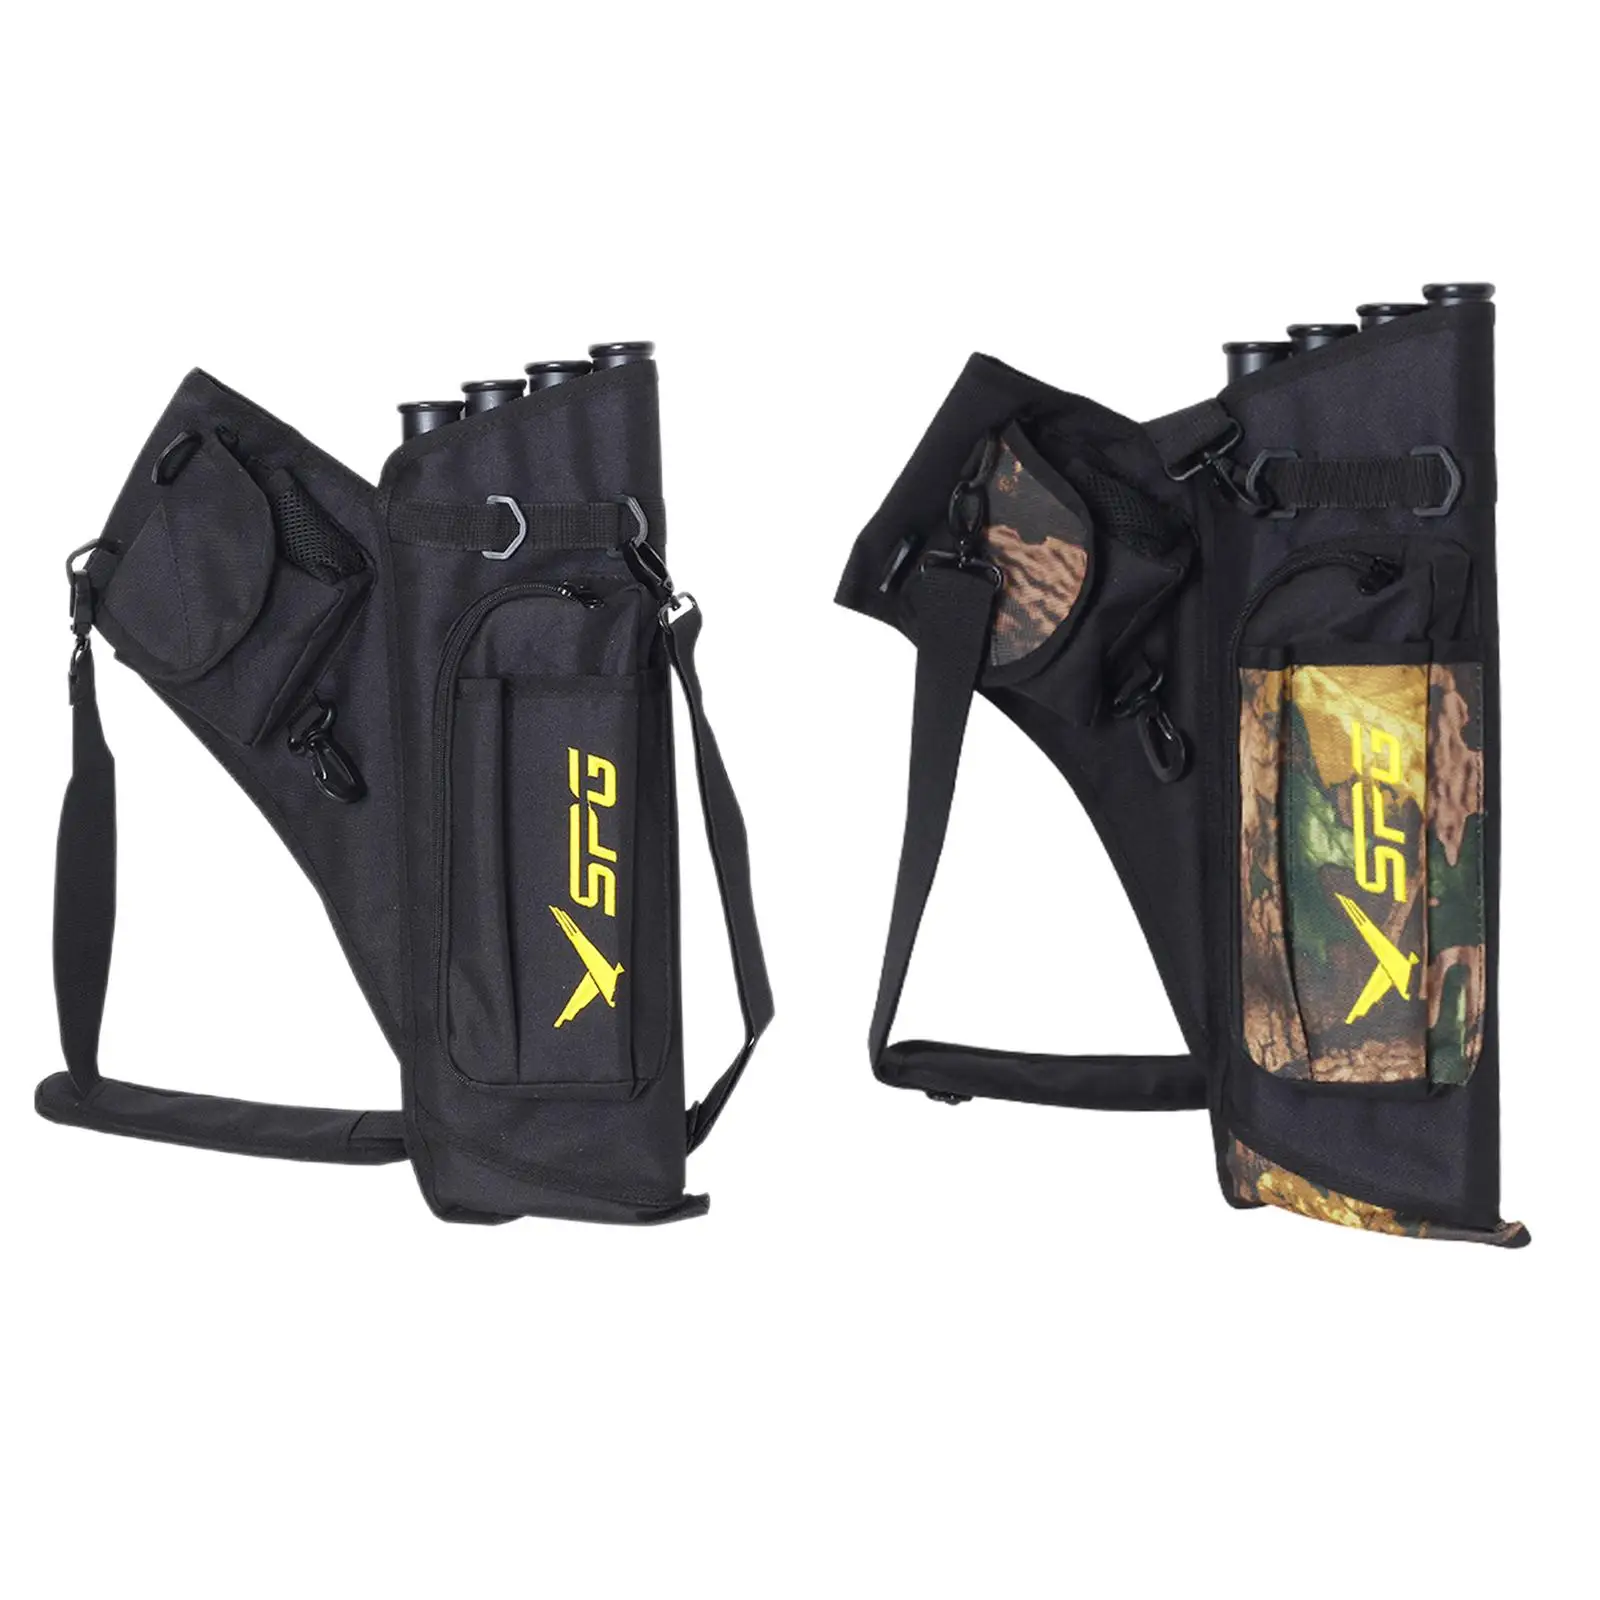   Quiver Target Quiver Bag for Hunting   Training Bow Practicing